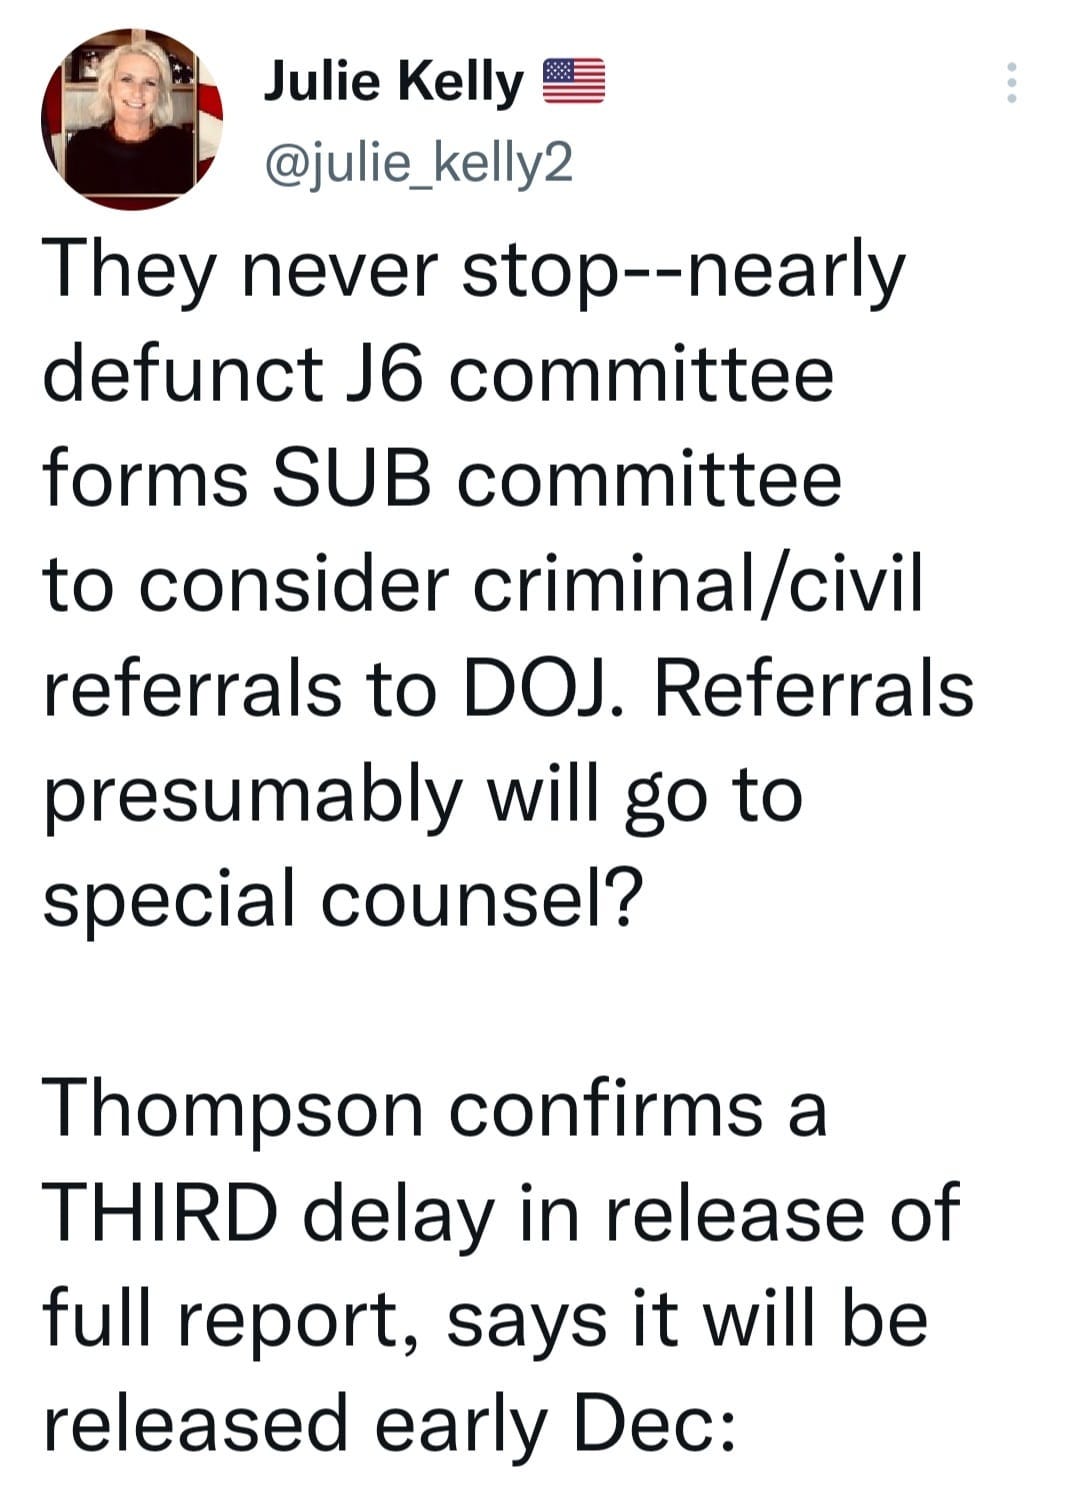 May be an image of 1 person and text that says 'Julie Kelly @julie_kelly2 They never stop--nearly defunct J6 committee forms SUB committee to consider criminal/civil /civil referrals to DOJ. Referrals presumably will go to special counsel? Thompson confirms a THIRD delay in release of full report, says it will be released early Dec:'